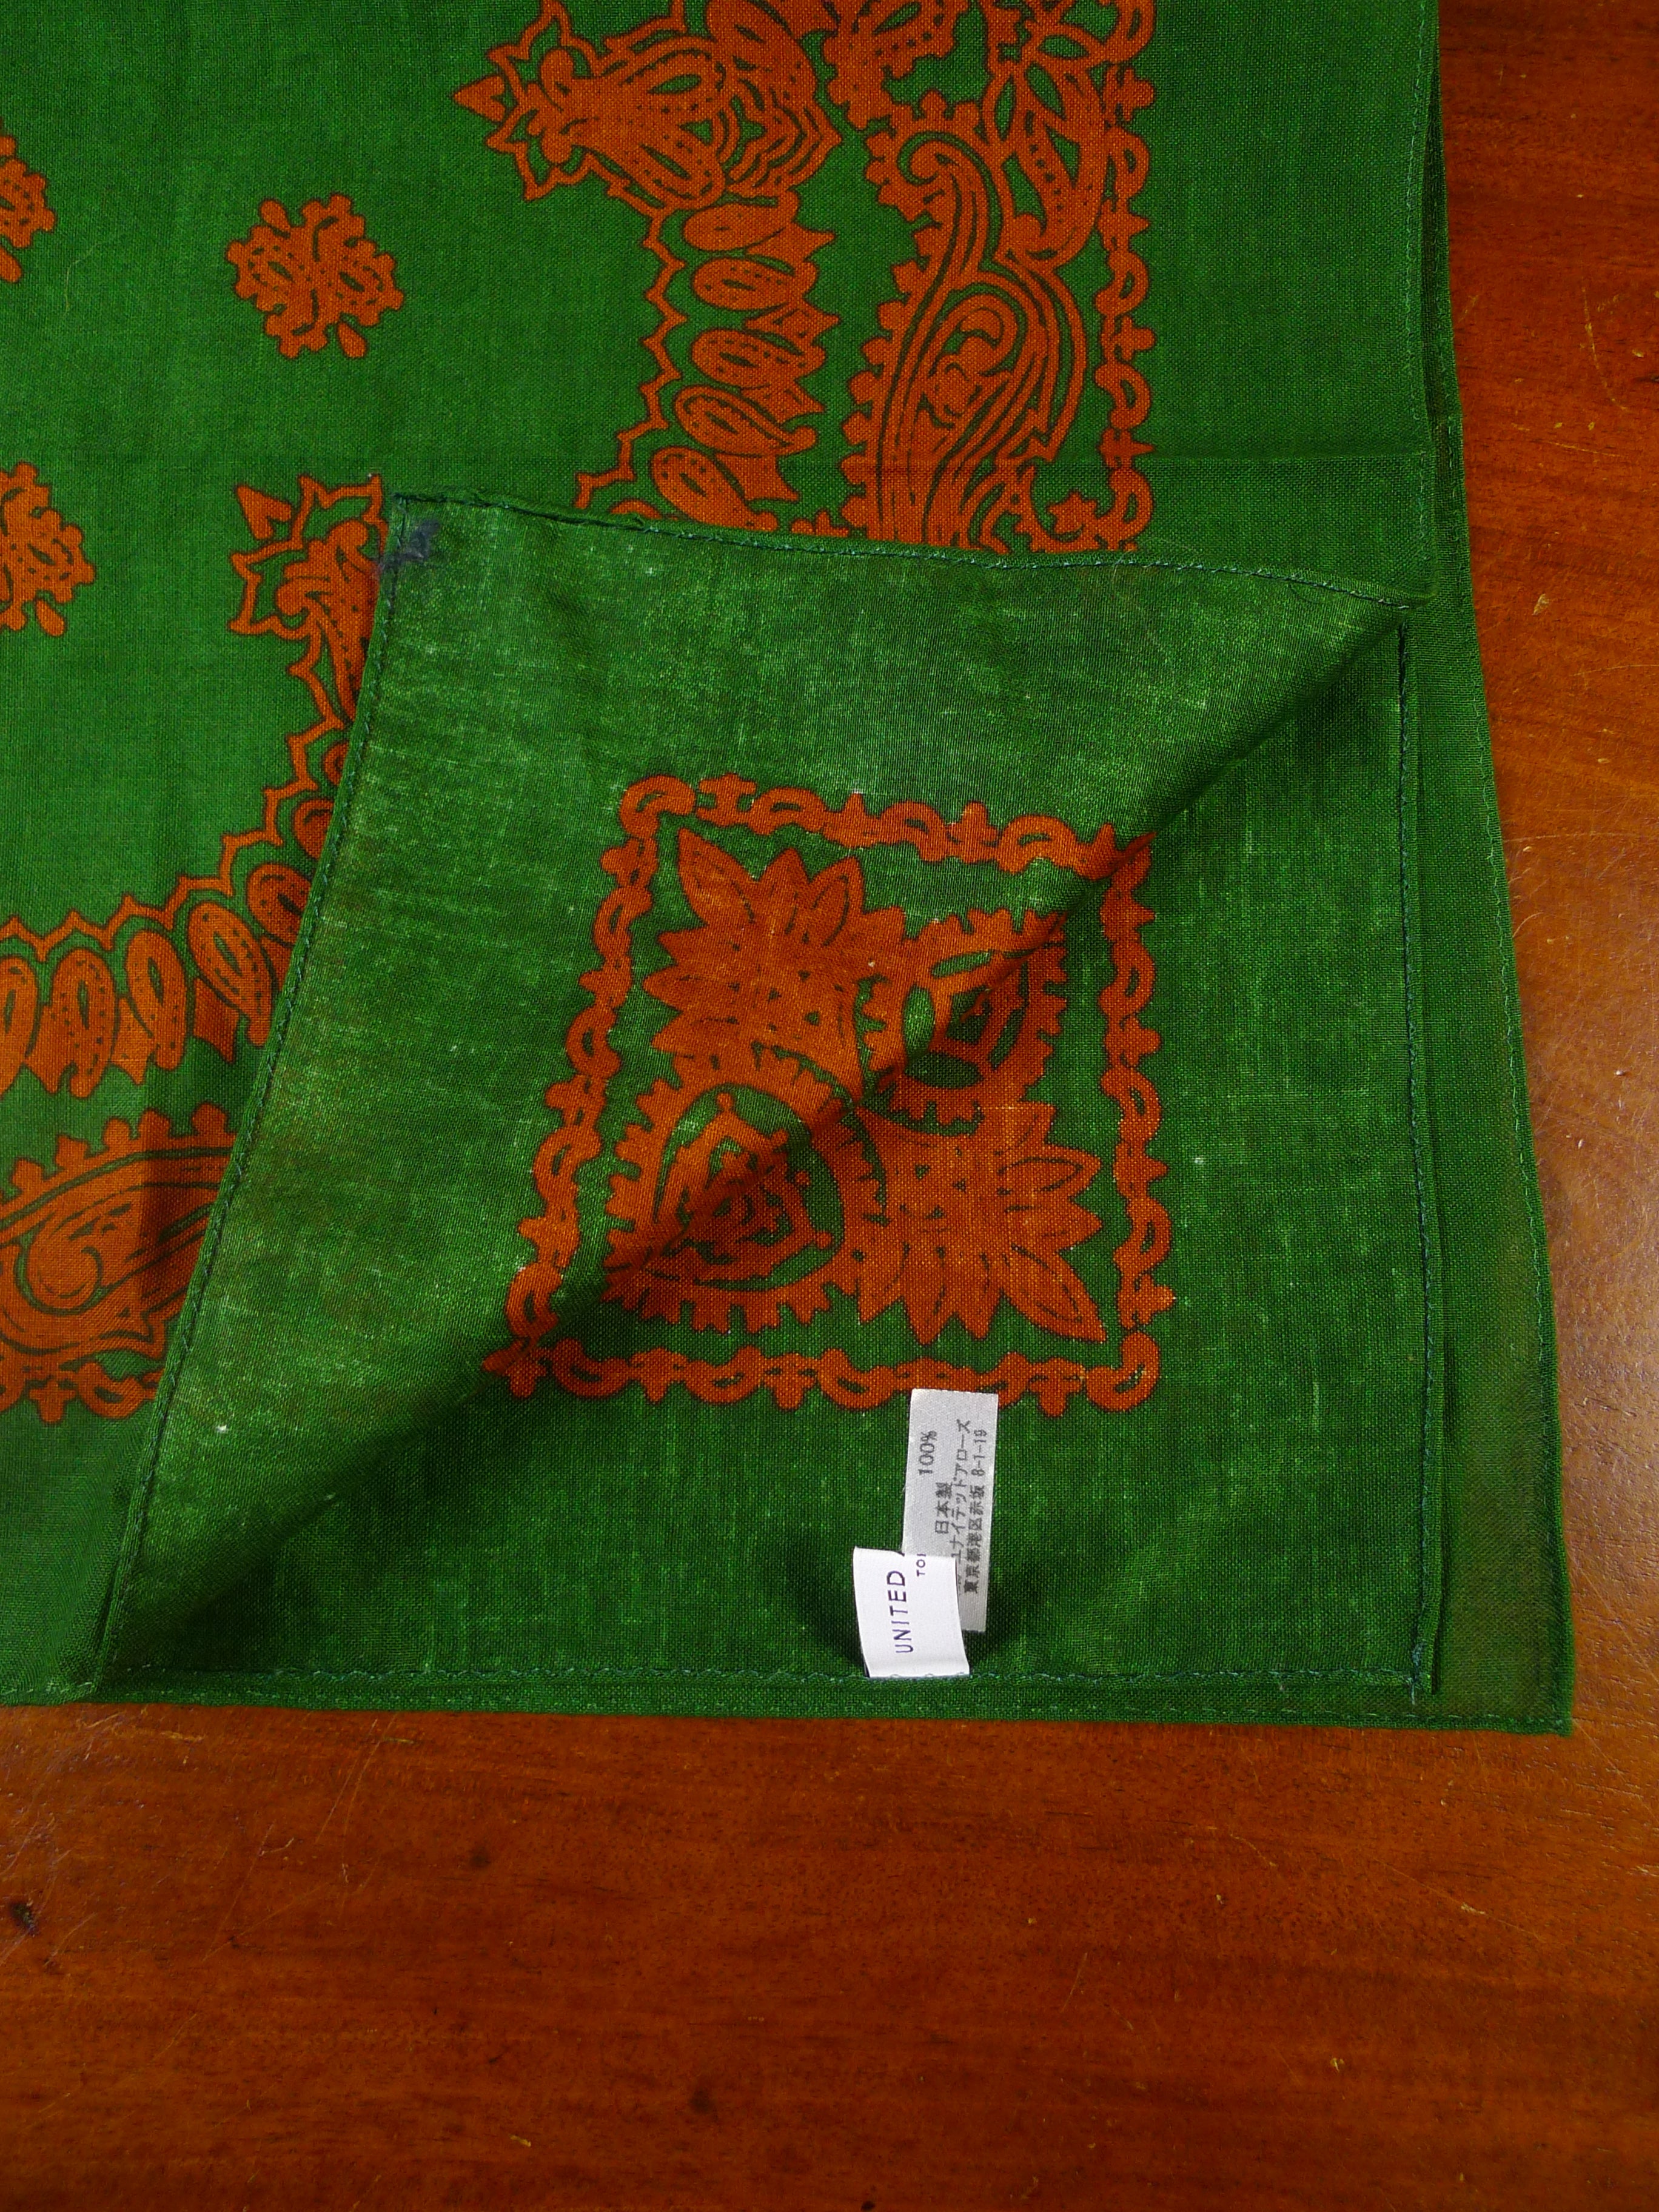 24/0120 immaculate united arrows green bronze linen pocket square